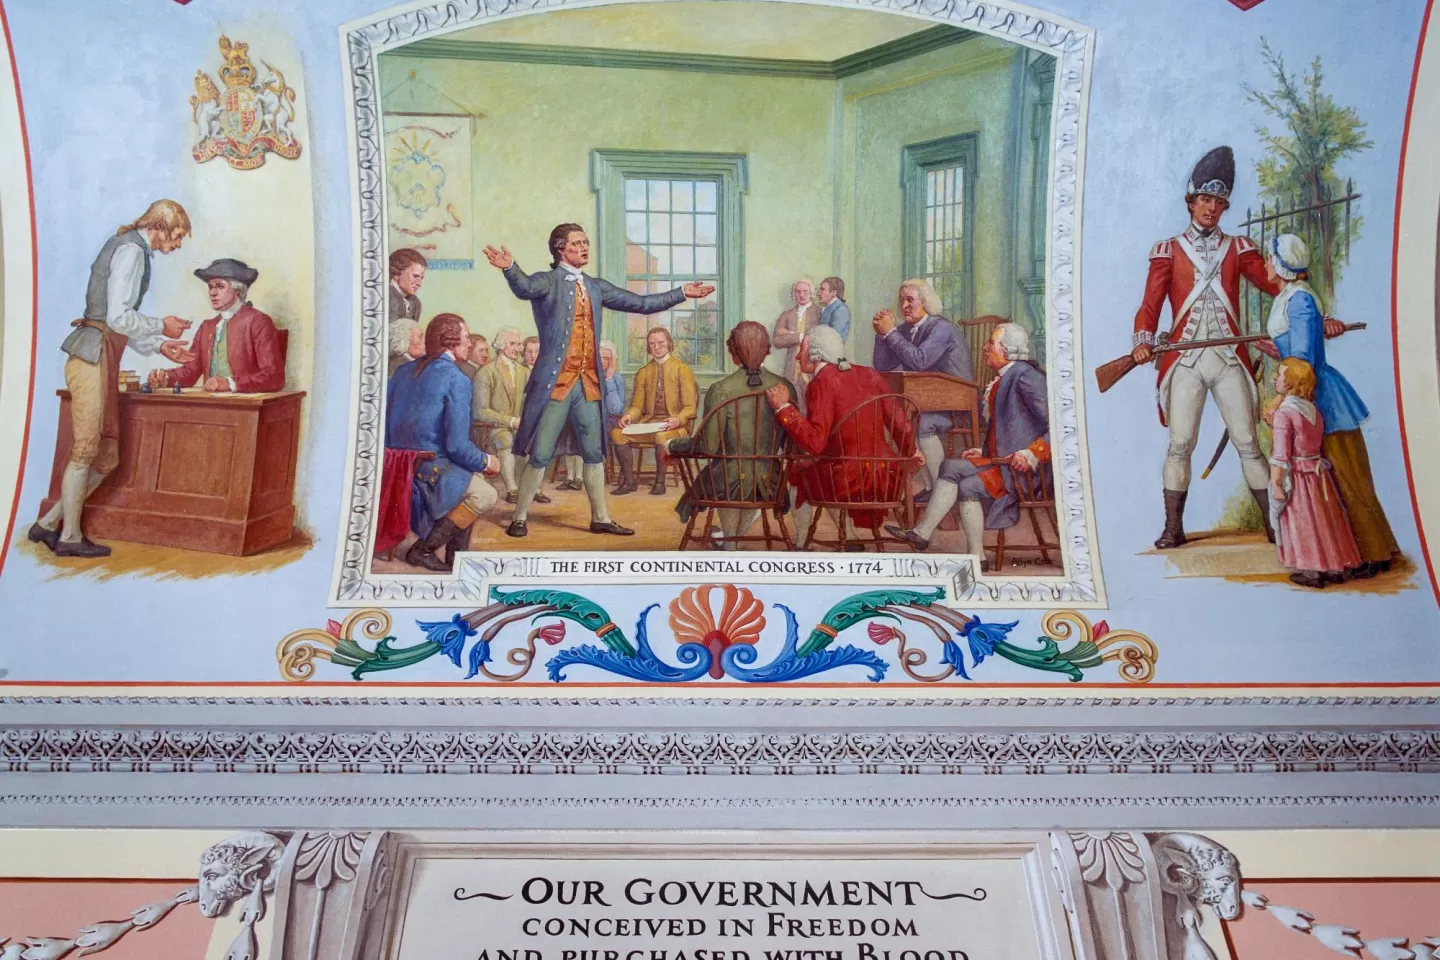 "The First Continental Congress, 1774" by Allyn Cox